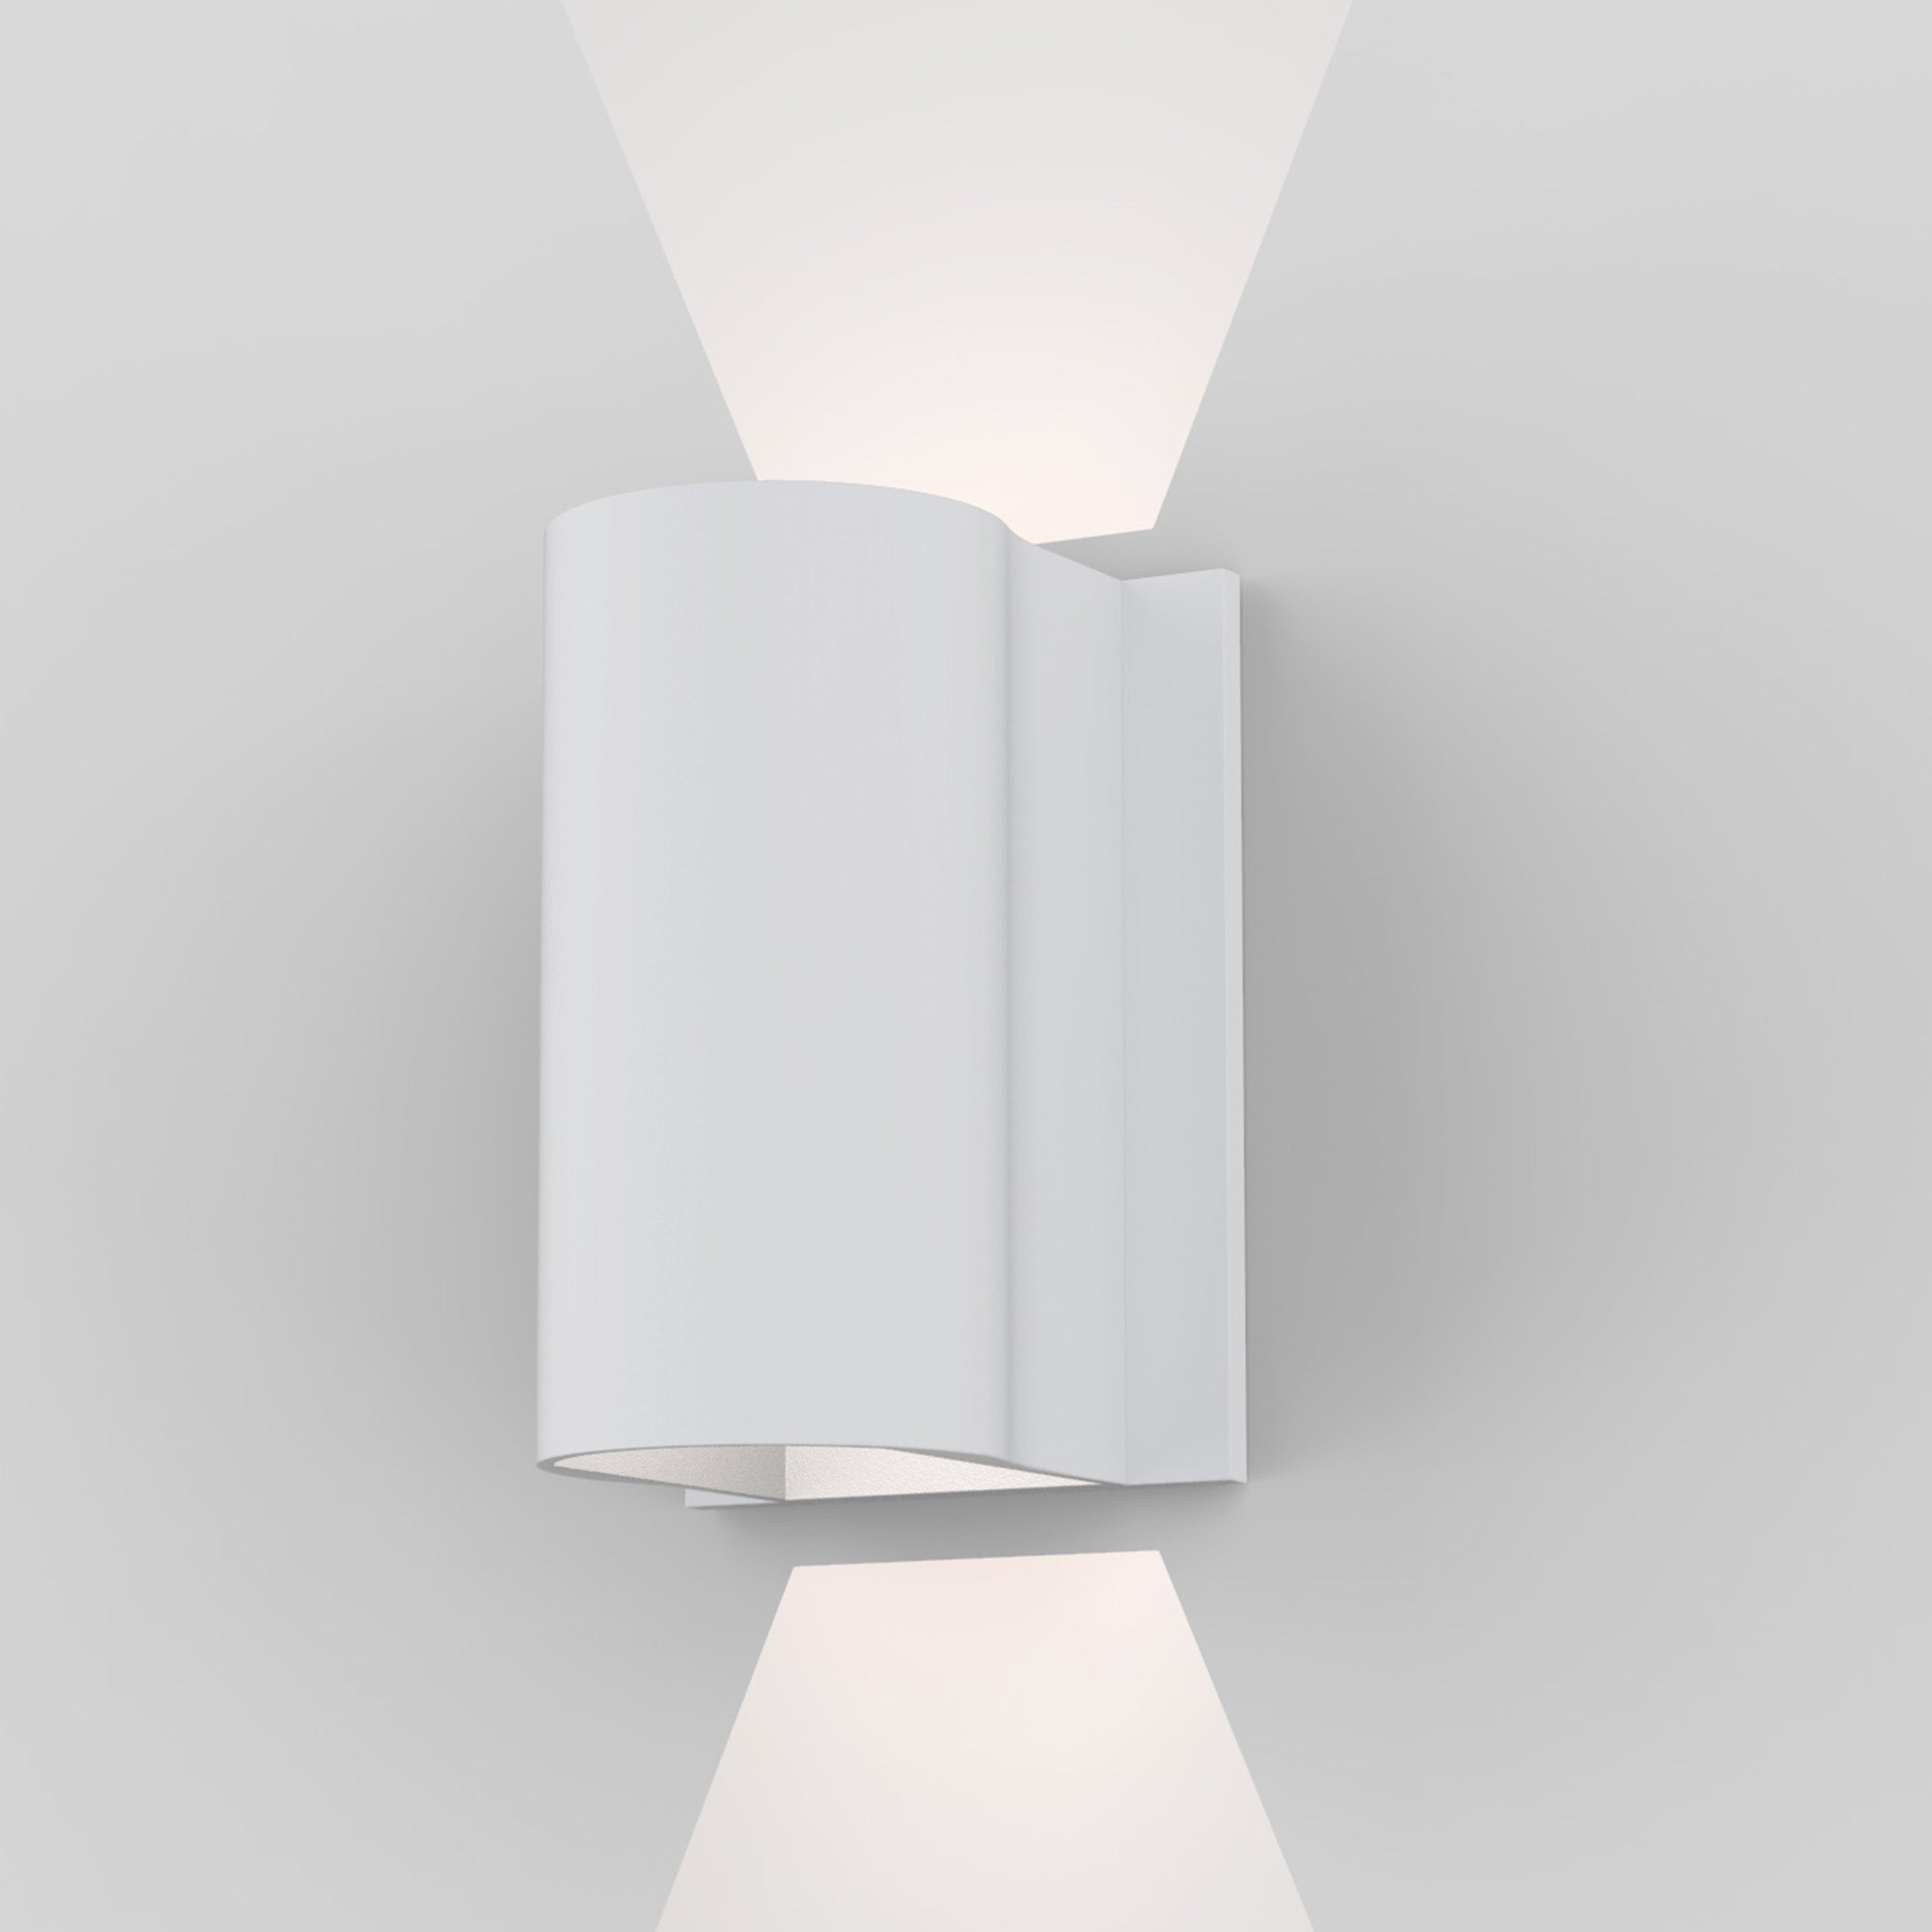 Astro Lighting Dunbar Wall Light Fixtures Astro Lighting 4.17x4.33x6.3 Textured White Yes (Integral), High Power LED